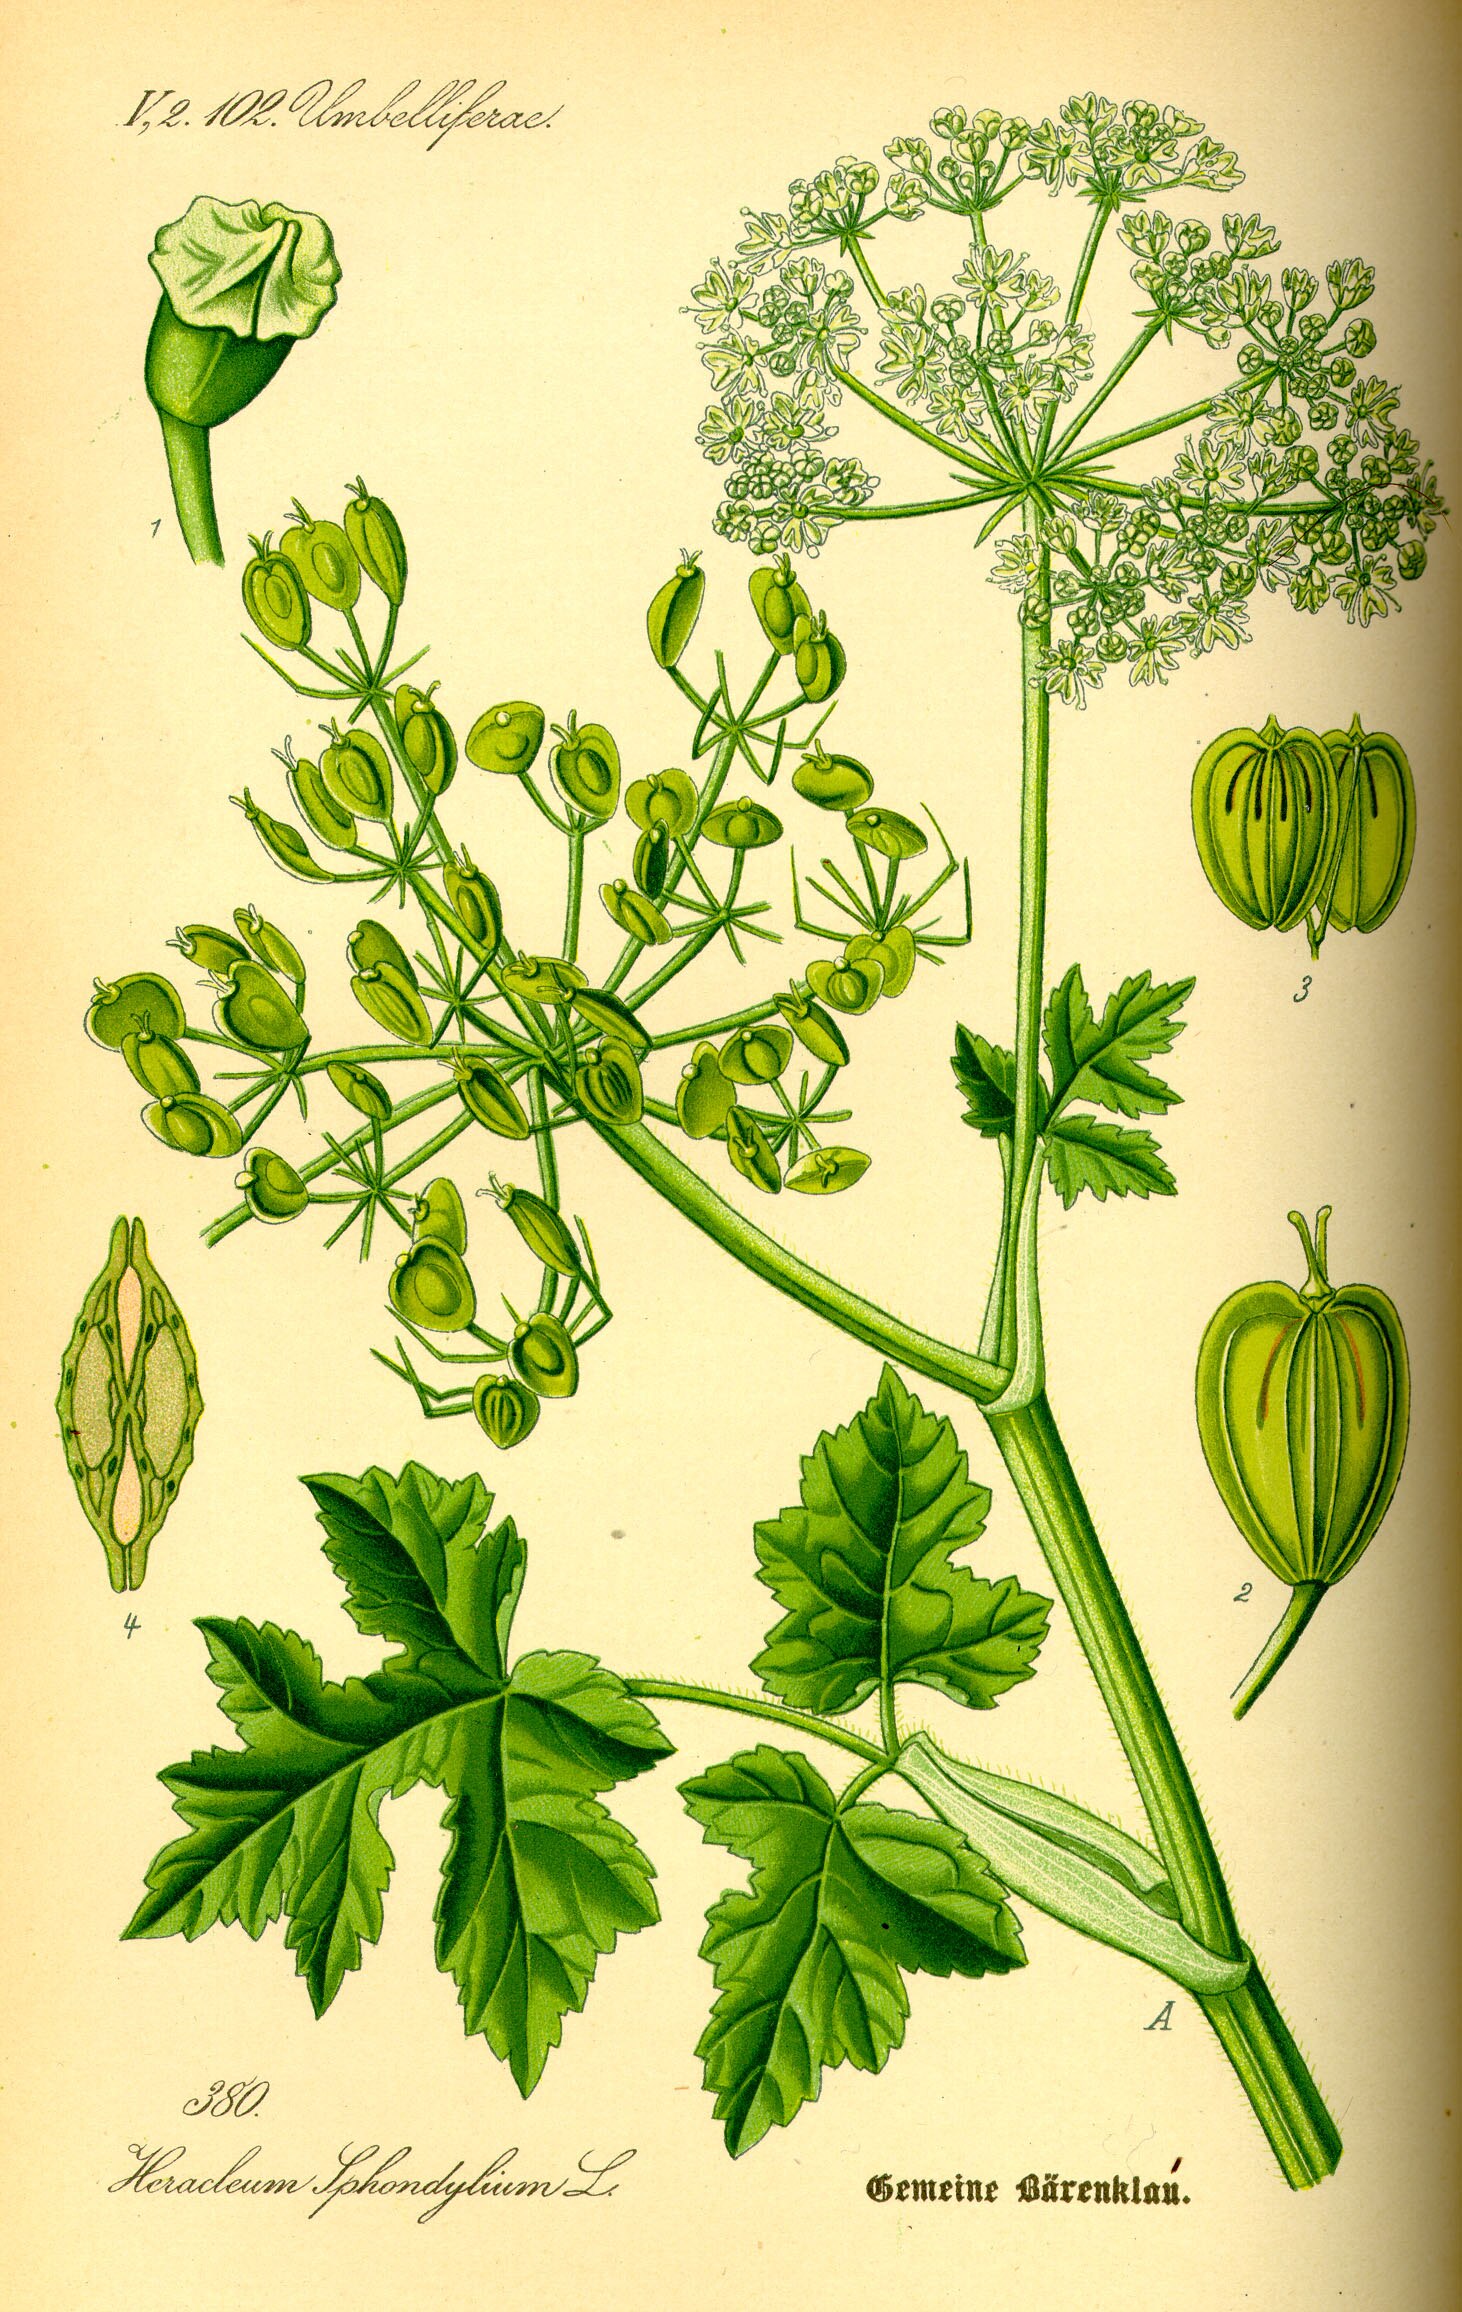 A botanical drawing of a plant, with heart-shaped pods